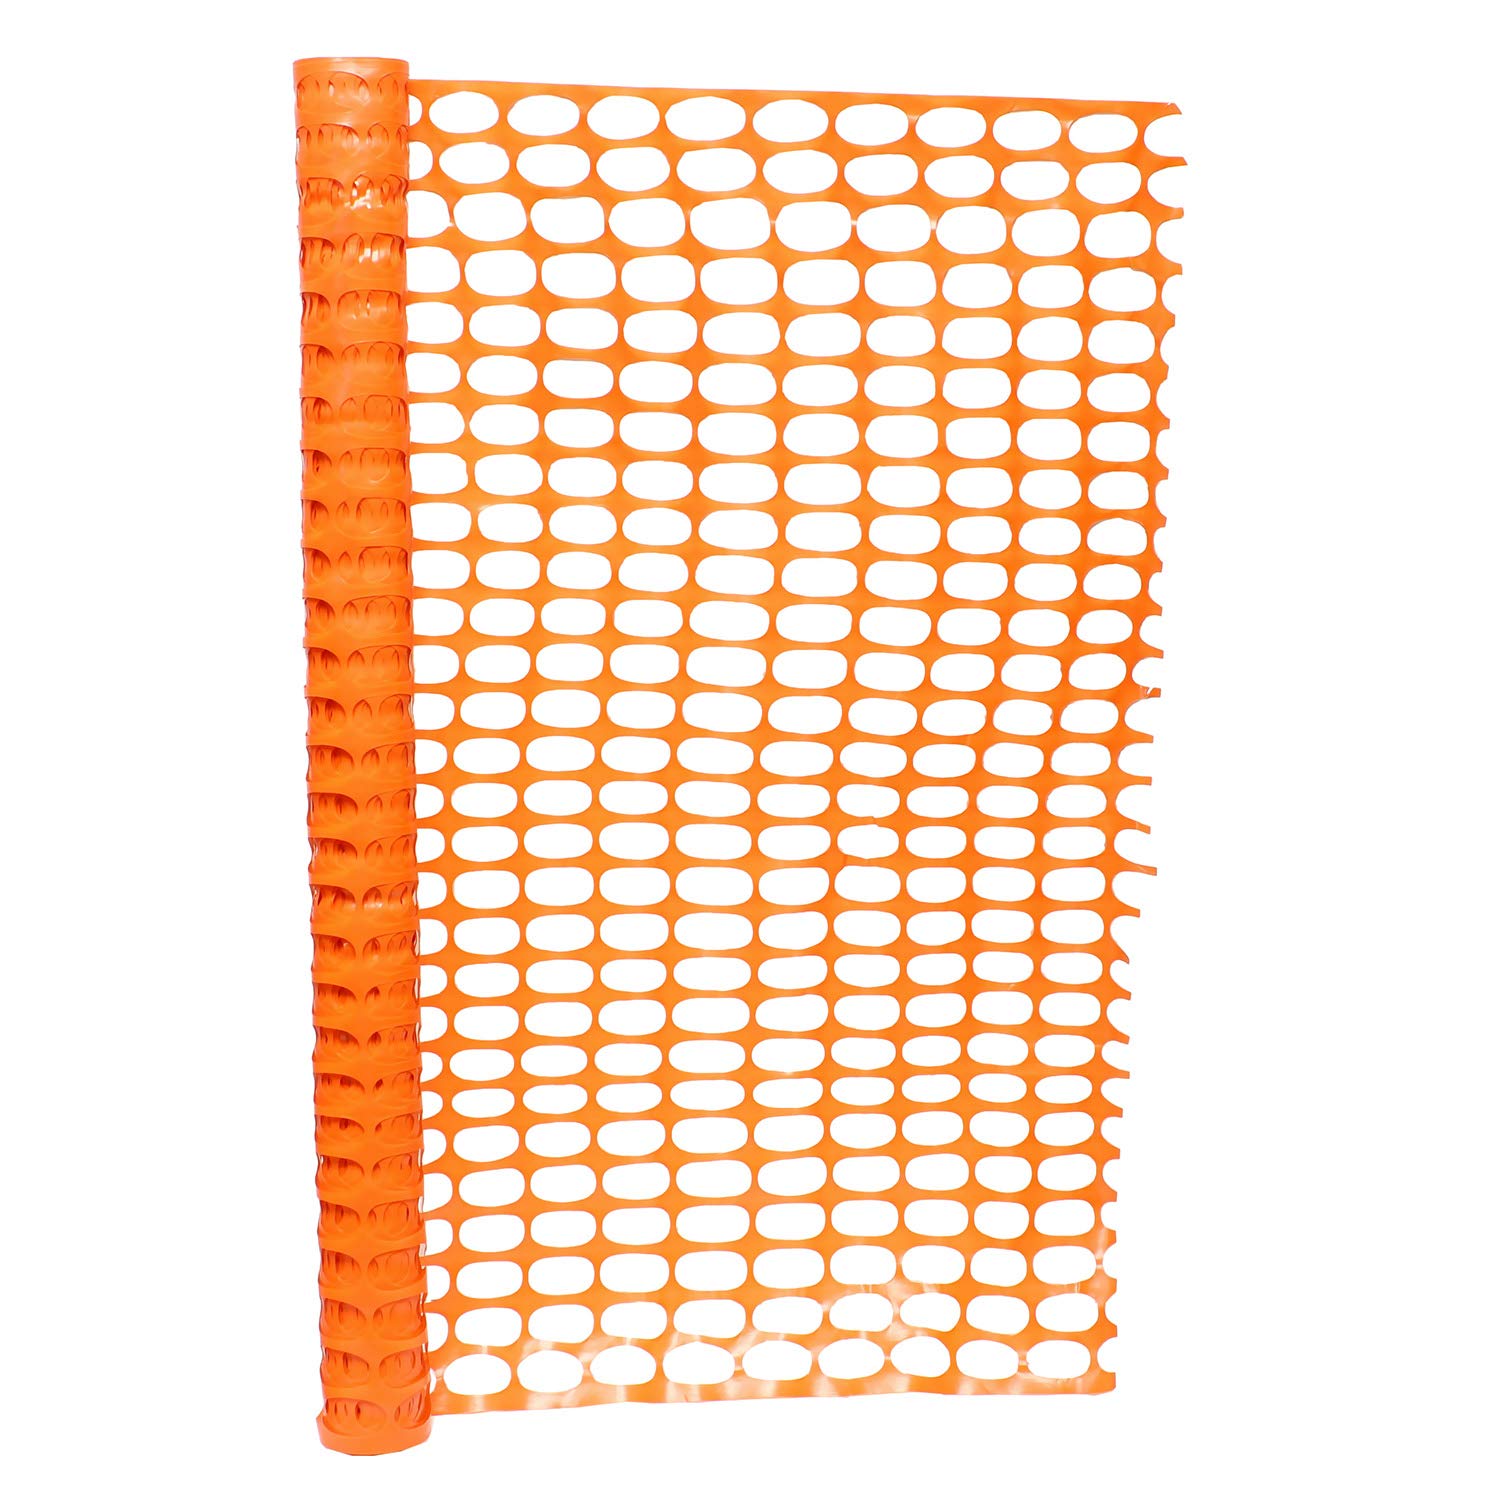 BISupply 4 FT Safety Fence - 50 FT Plastic Fencing Roll for construction Fencing Pet Fencing and Event Fencing, Orange